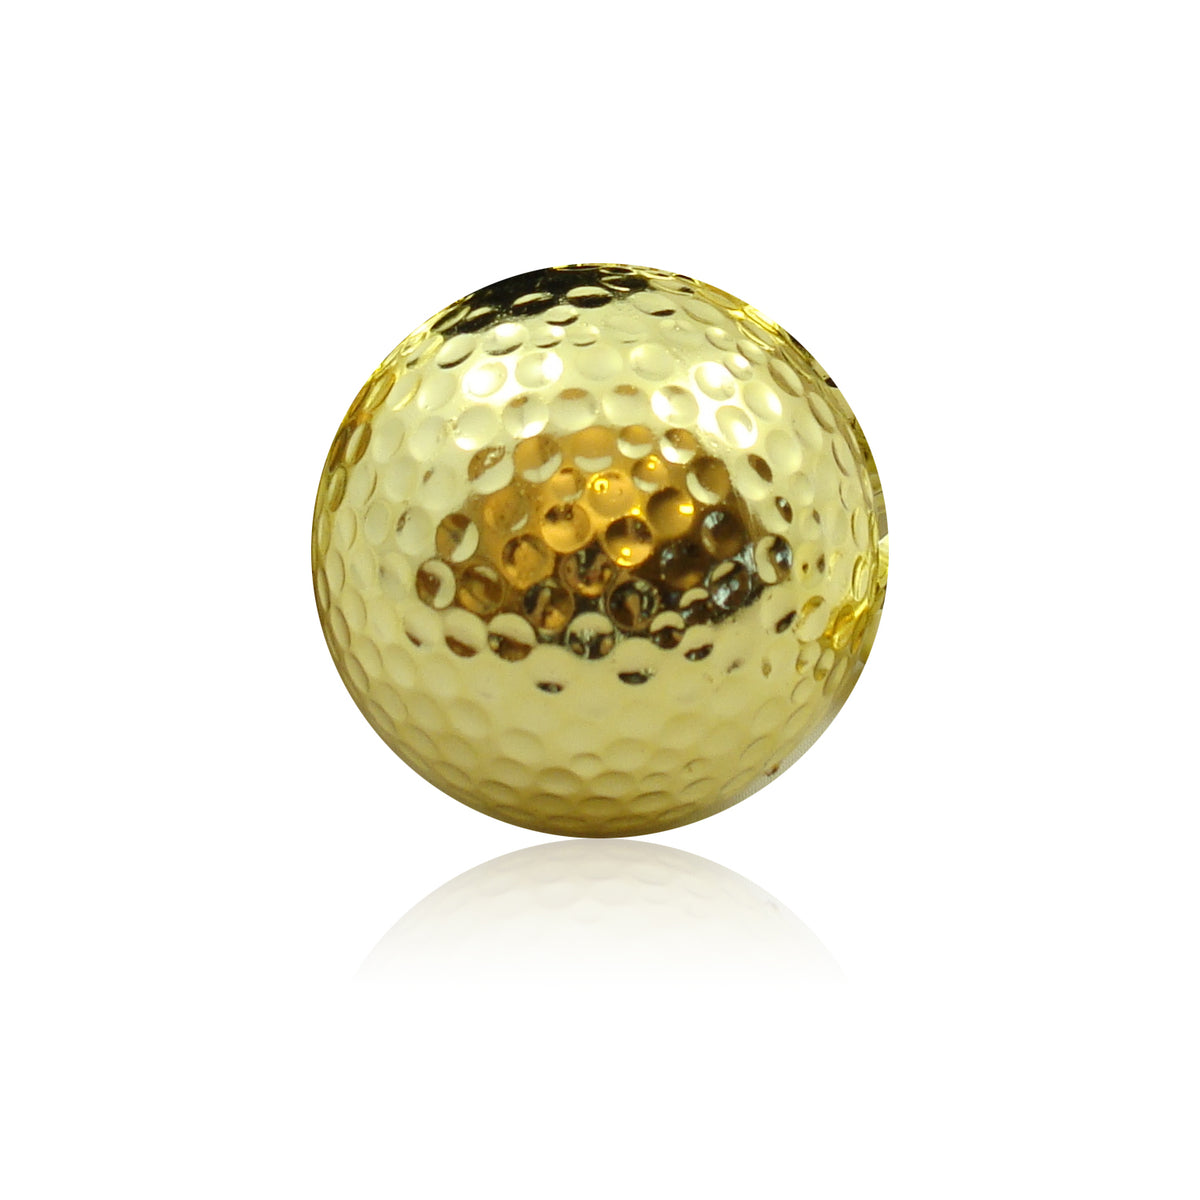 24K Golf! - Real 24K Gold Plated Golf Ball and Tee (For Display Only)